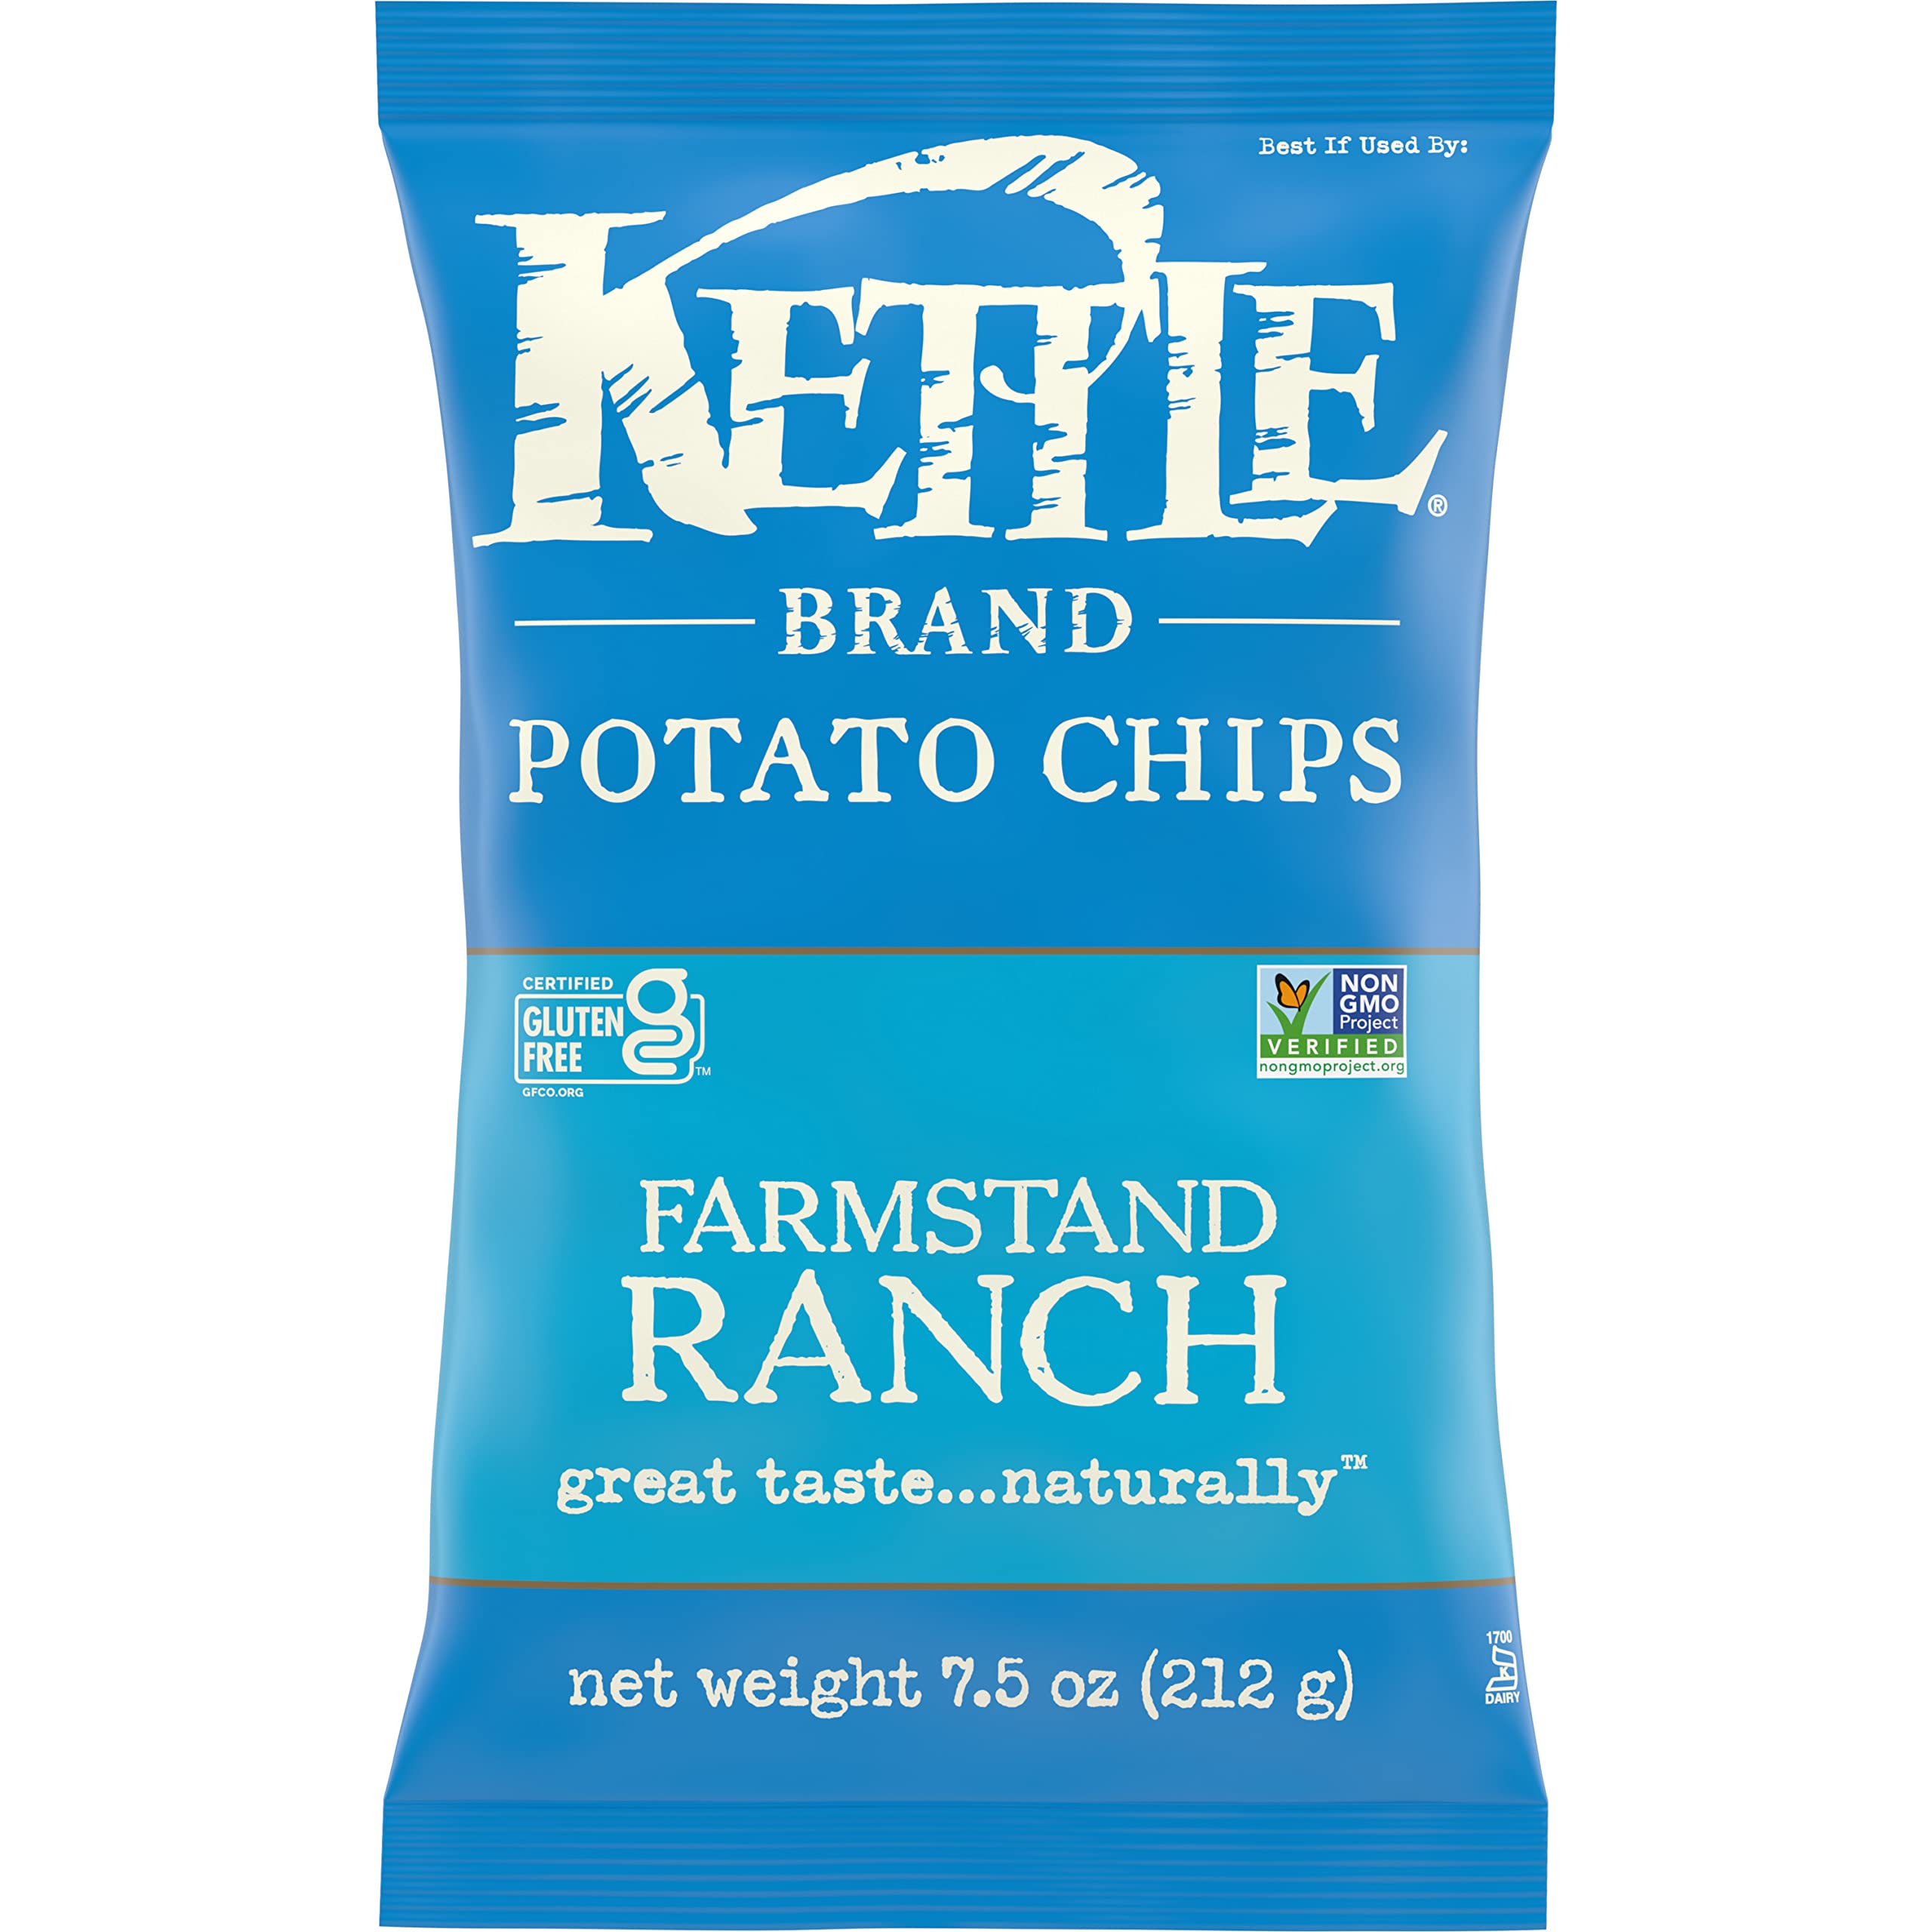 7.5-Oz Kettle Brand Potato Chips (Farmstand Ranch) $1.59 w/ S&S + Free Shipping w/ Prime or on orders over $35